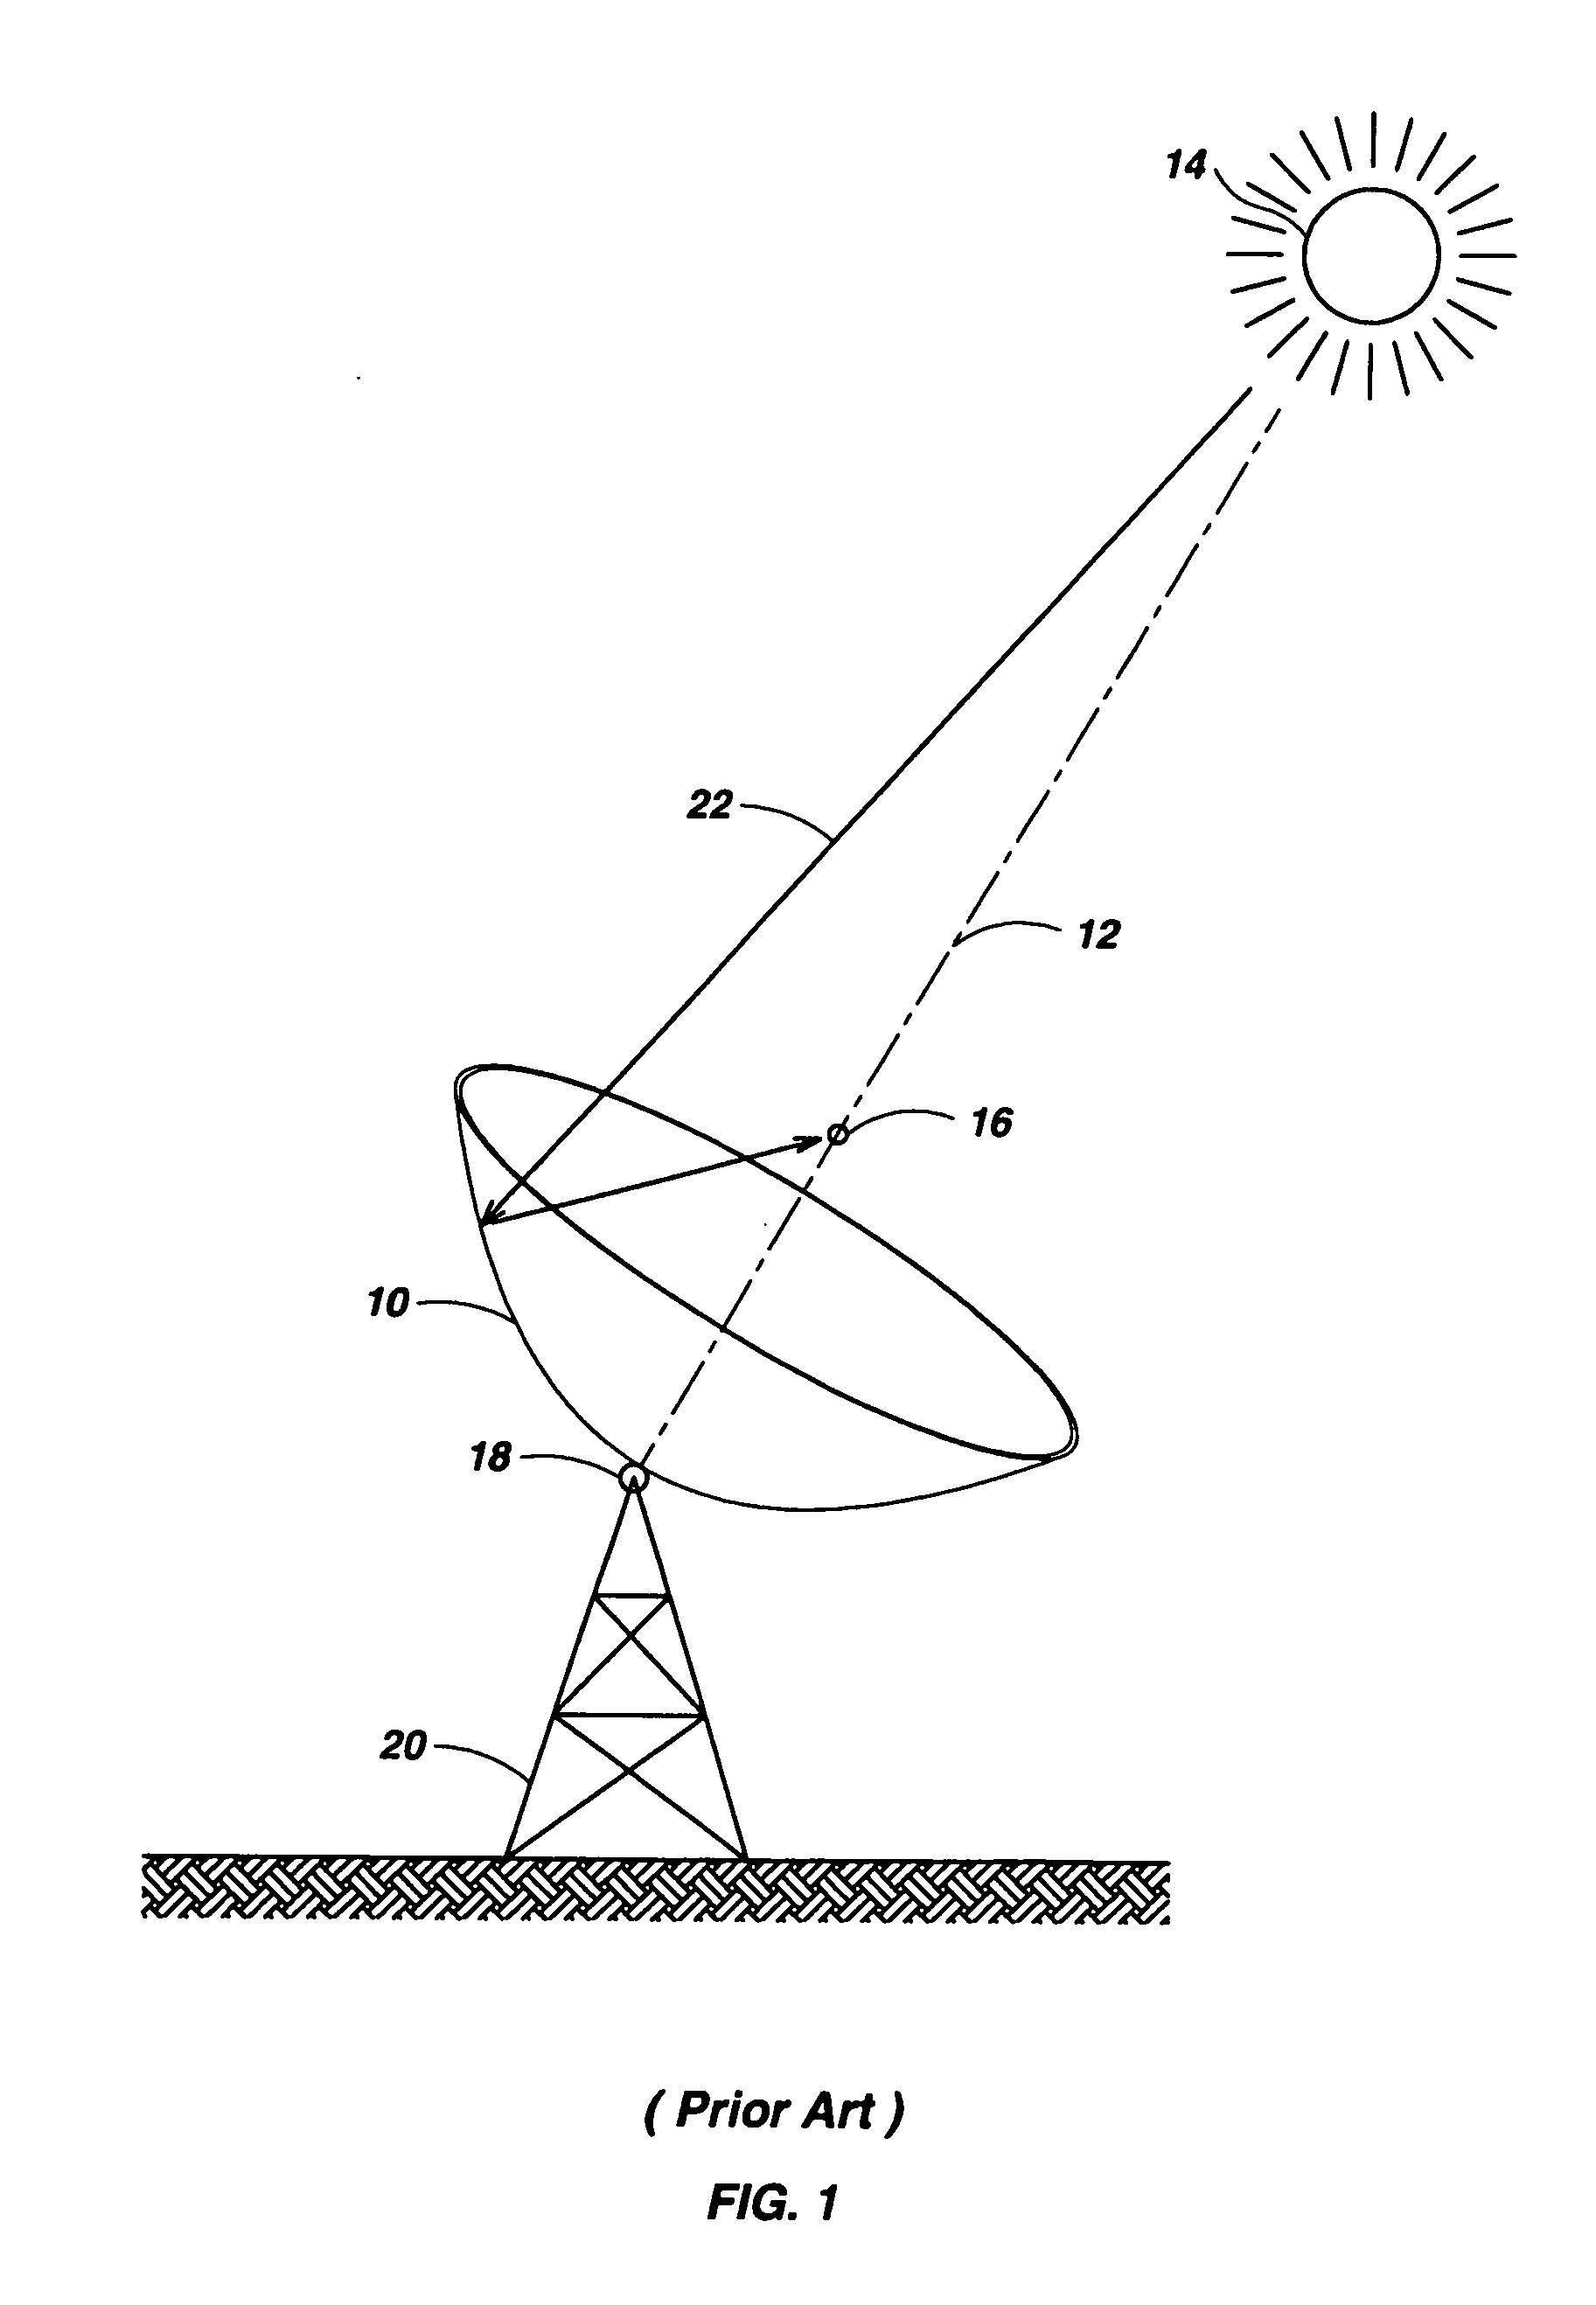 Solar collection apparatus and methods